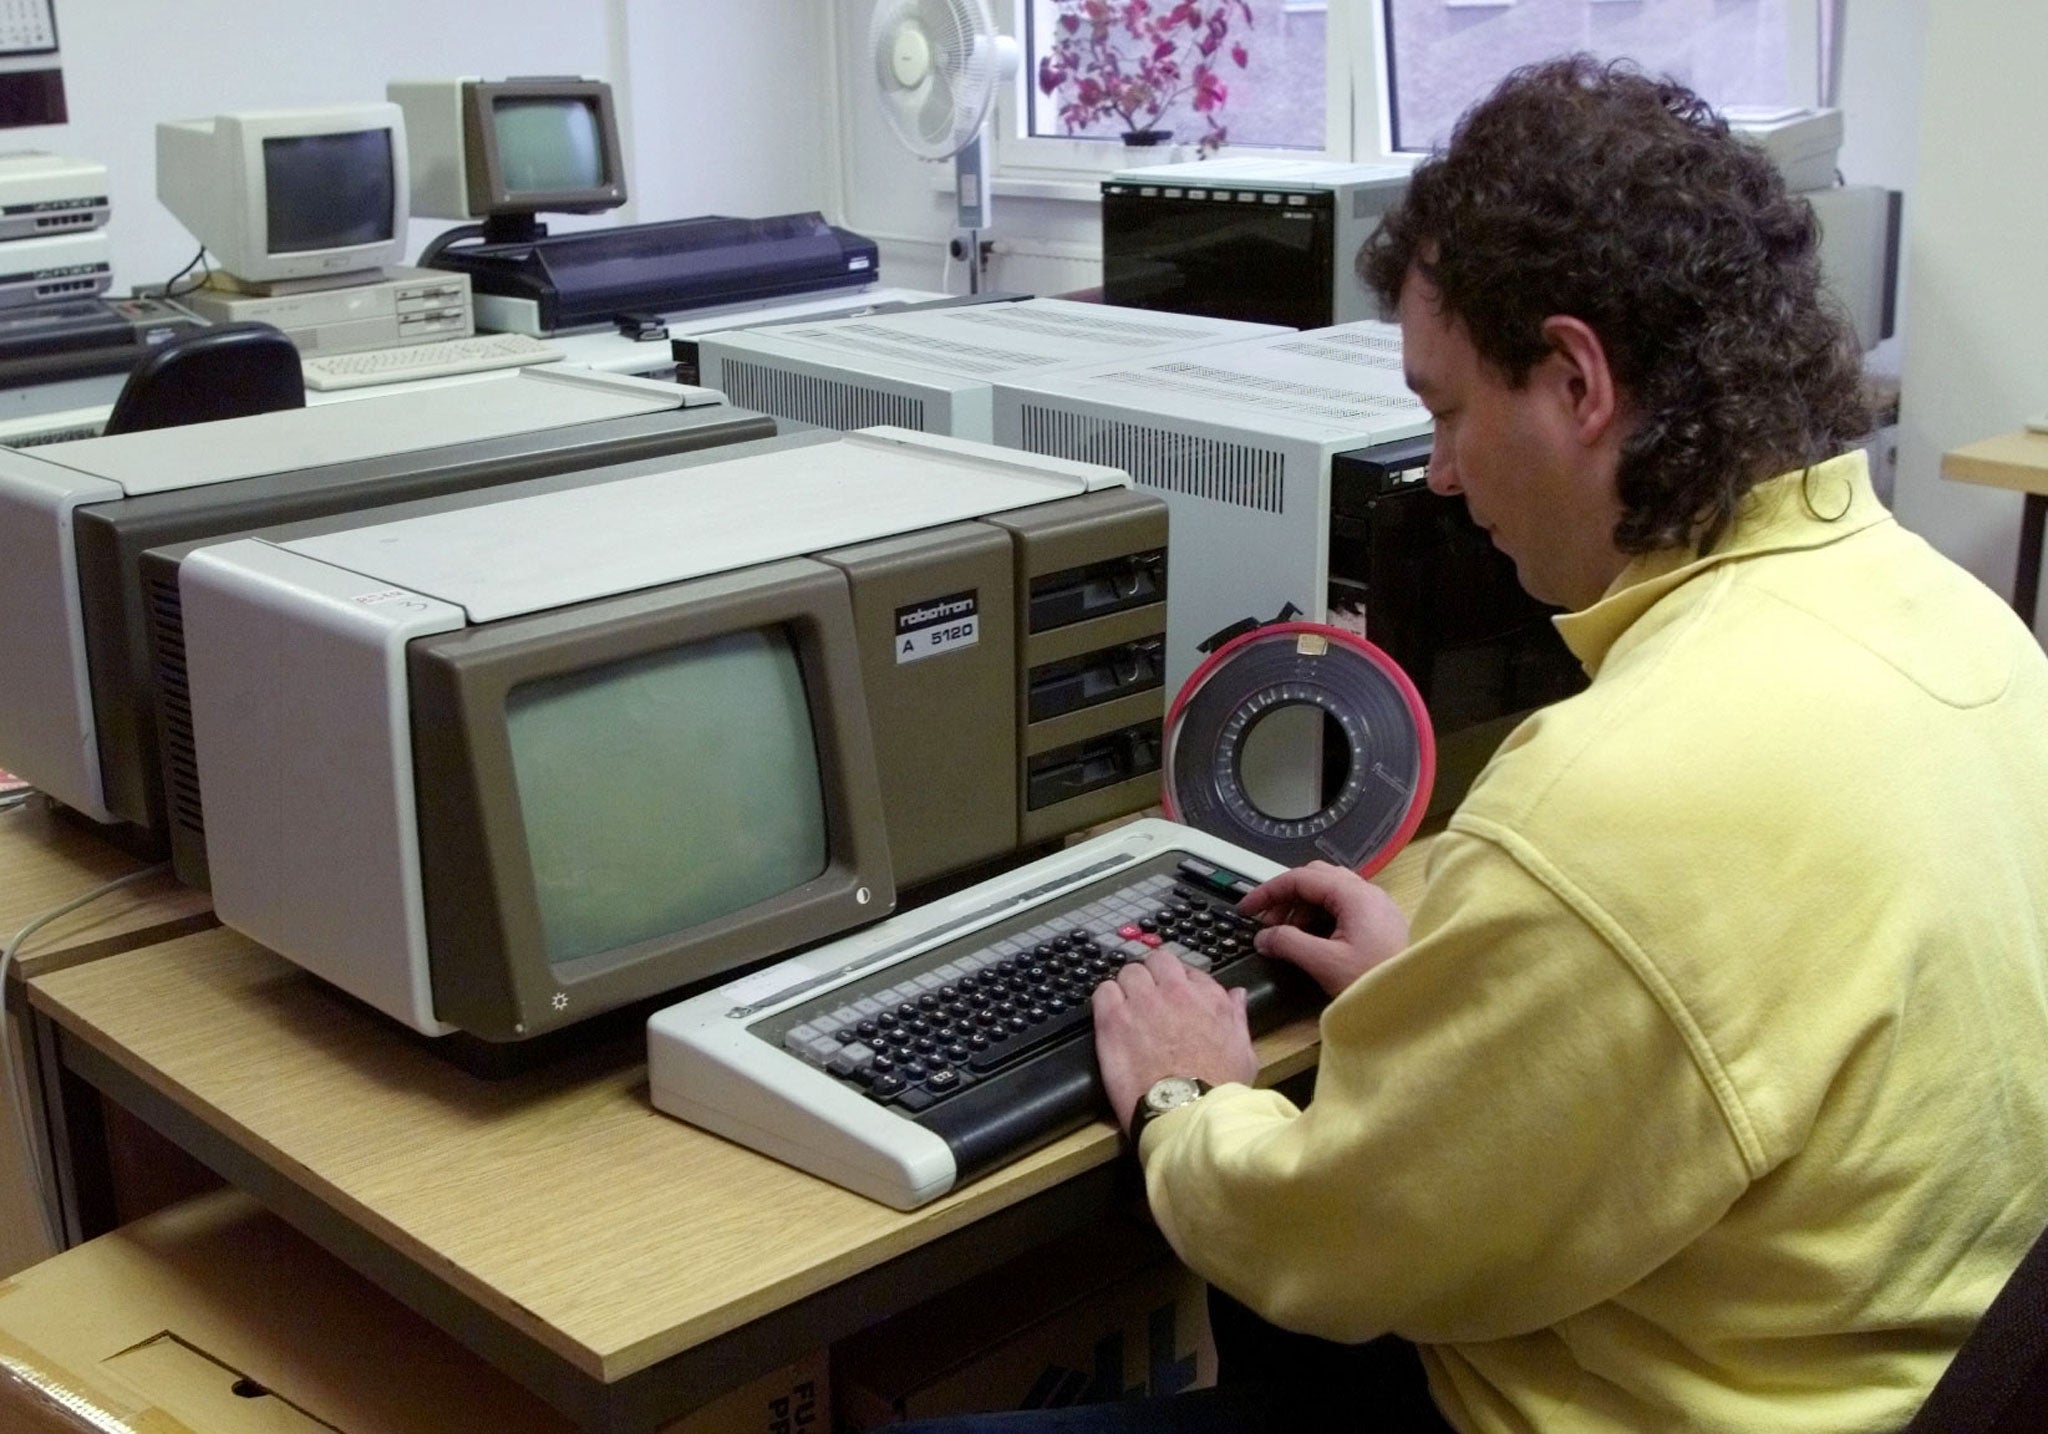 Your computer might not be quite as old as this, but slow wait times can make anyone feel like they're working in the 90s.